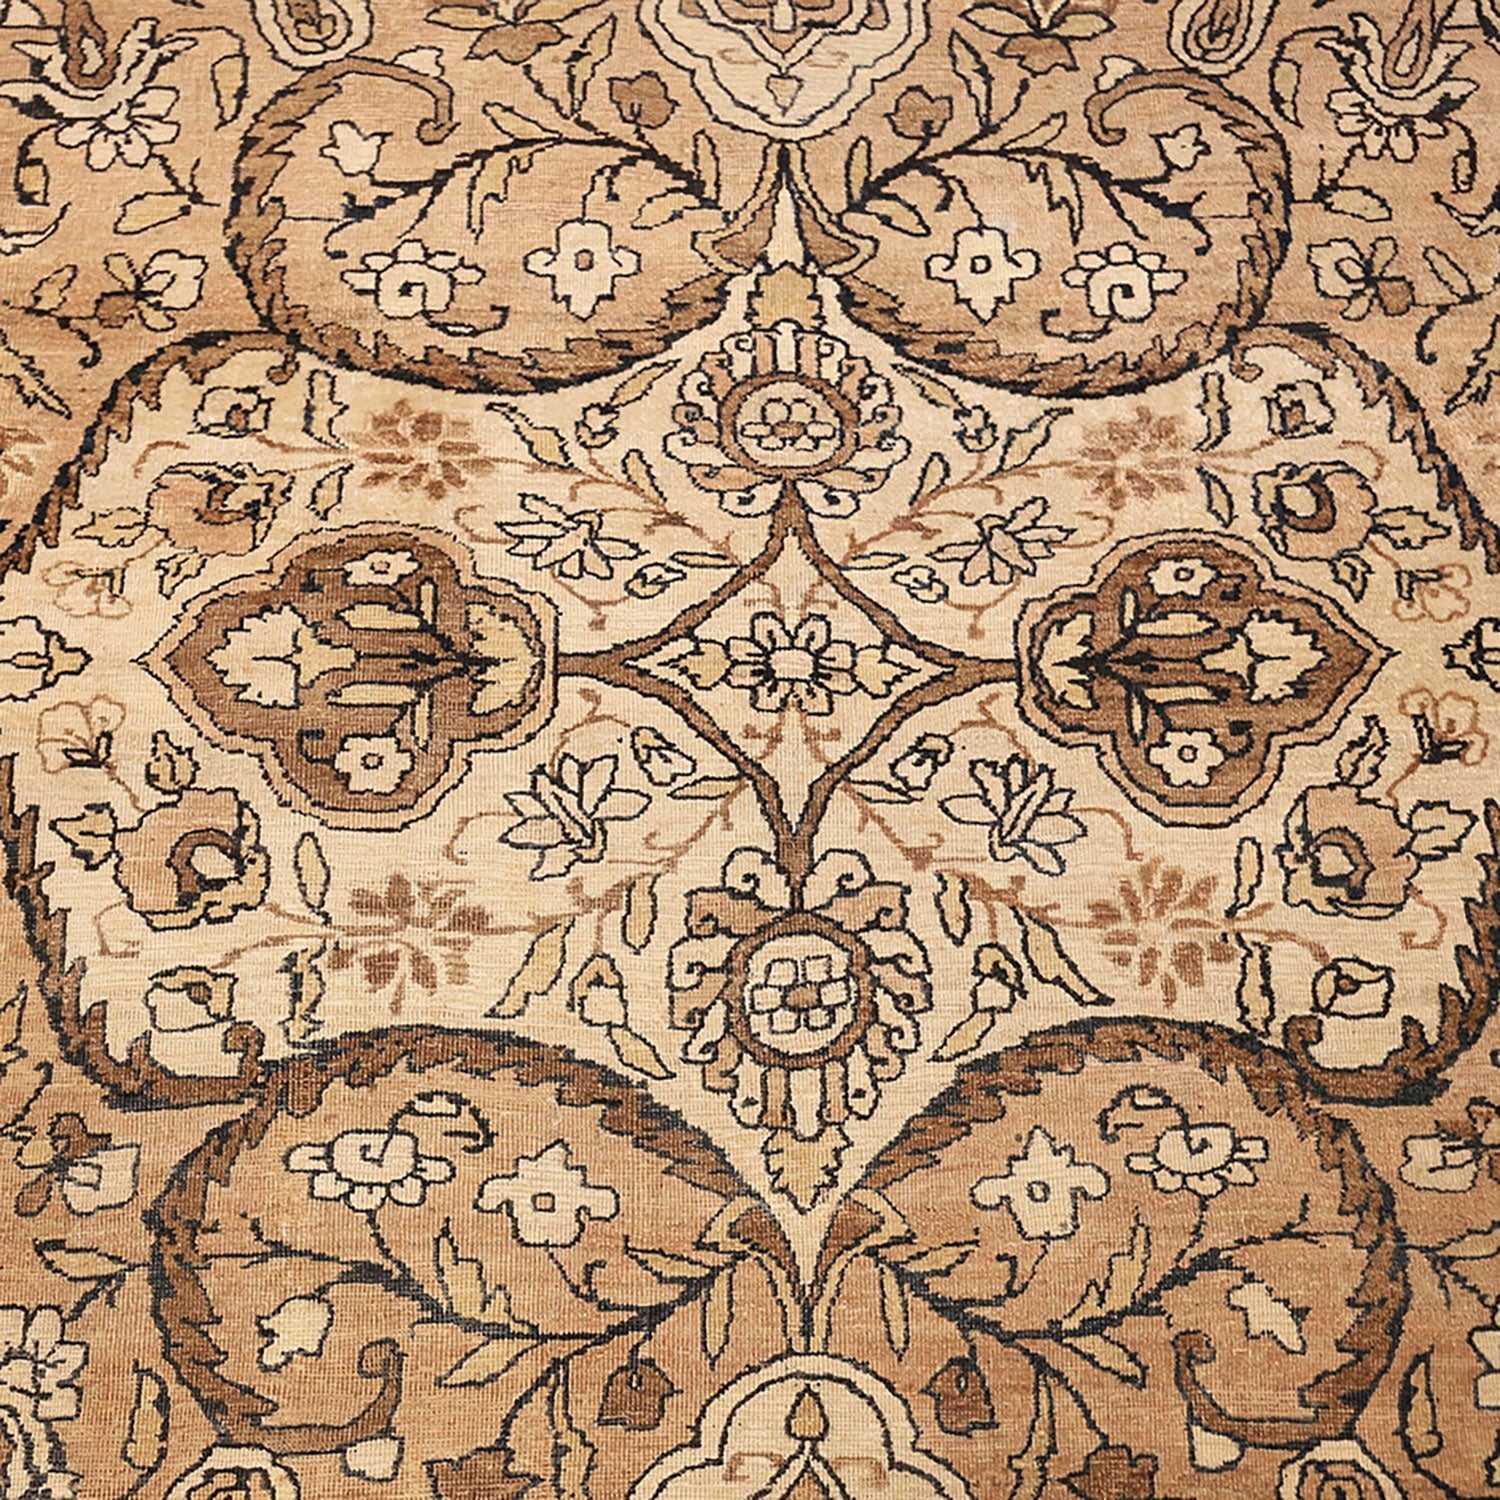 Close-up of a symmetrical floral and vegetal patterned fabric or carpet.